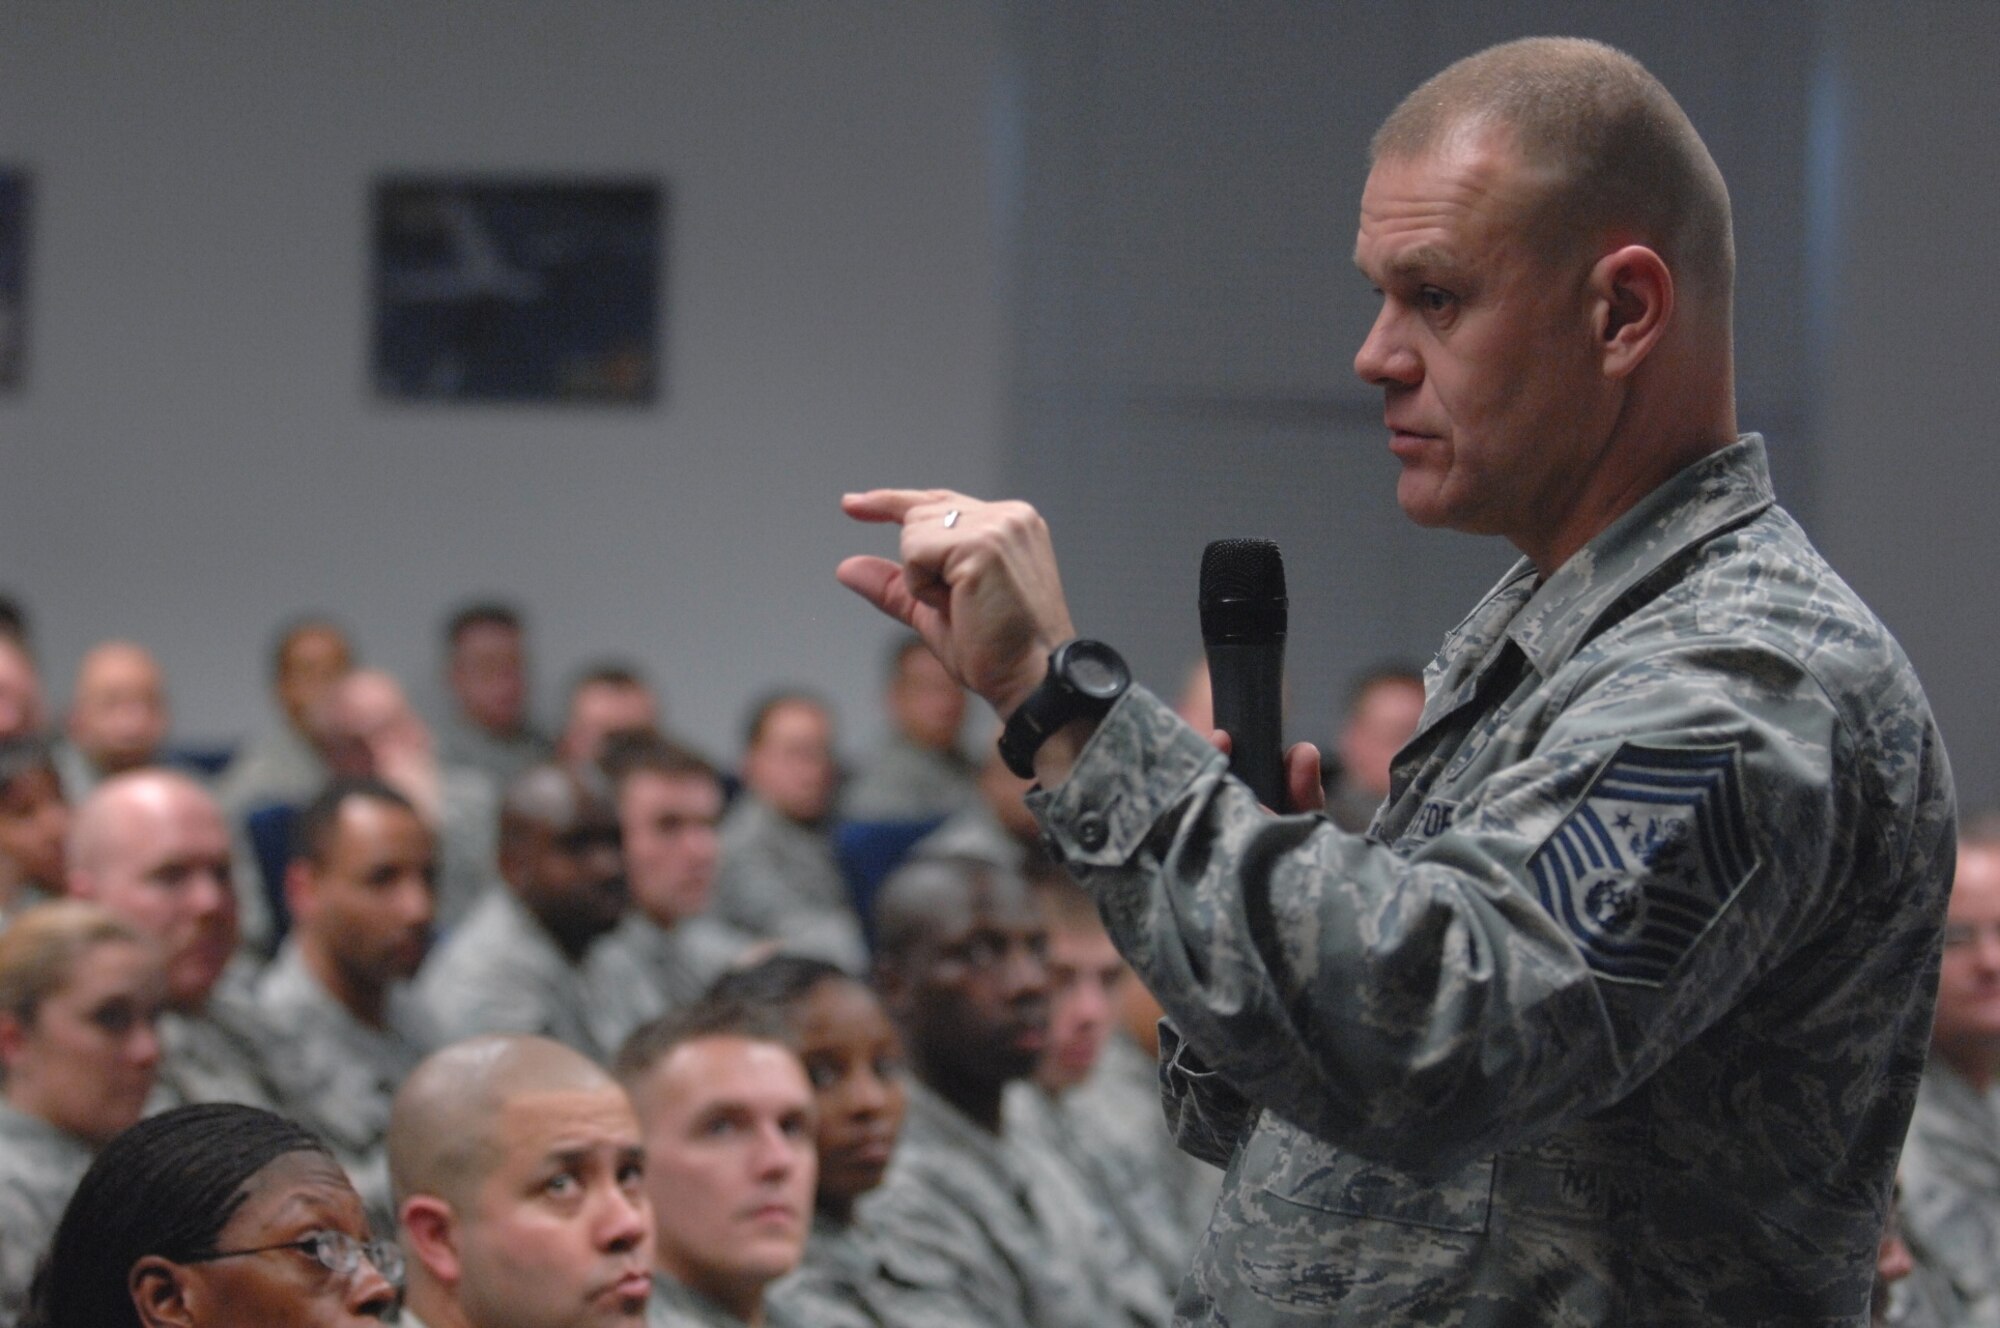 Chief Master Sergeant of the Air Force James Roy talked to Airmen at the Kisling Non-commissioned Officer Academy at Kapaun Air Station, Germany during his visit to U.S. Air Forces in Europe Nov. 24.  CMSAF Roy spoke with the Airmen about his priorities and goals and fielded questions from the audience. (U.S. Air Force photo/Master Sgt. Corey Clements)